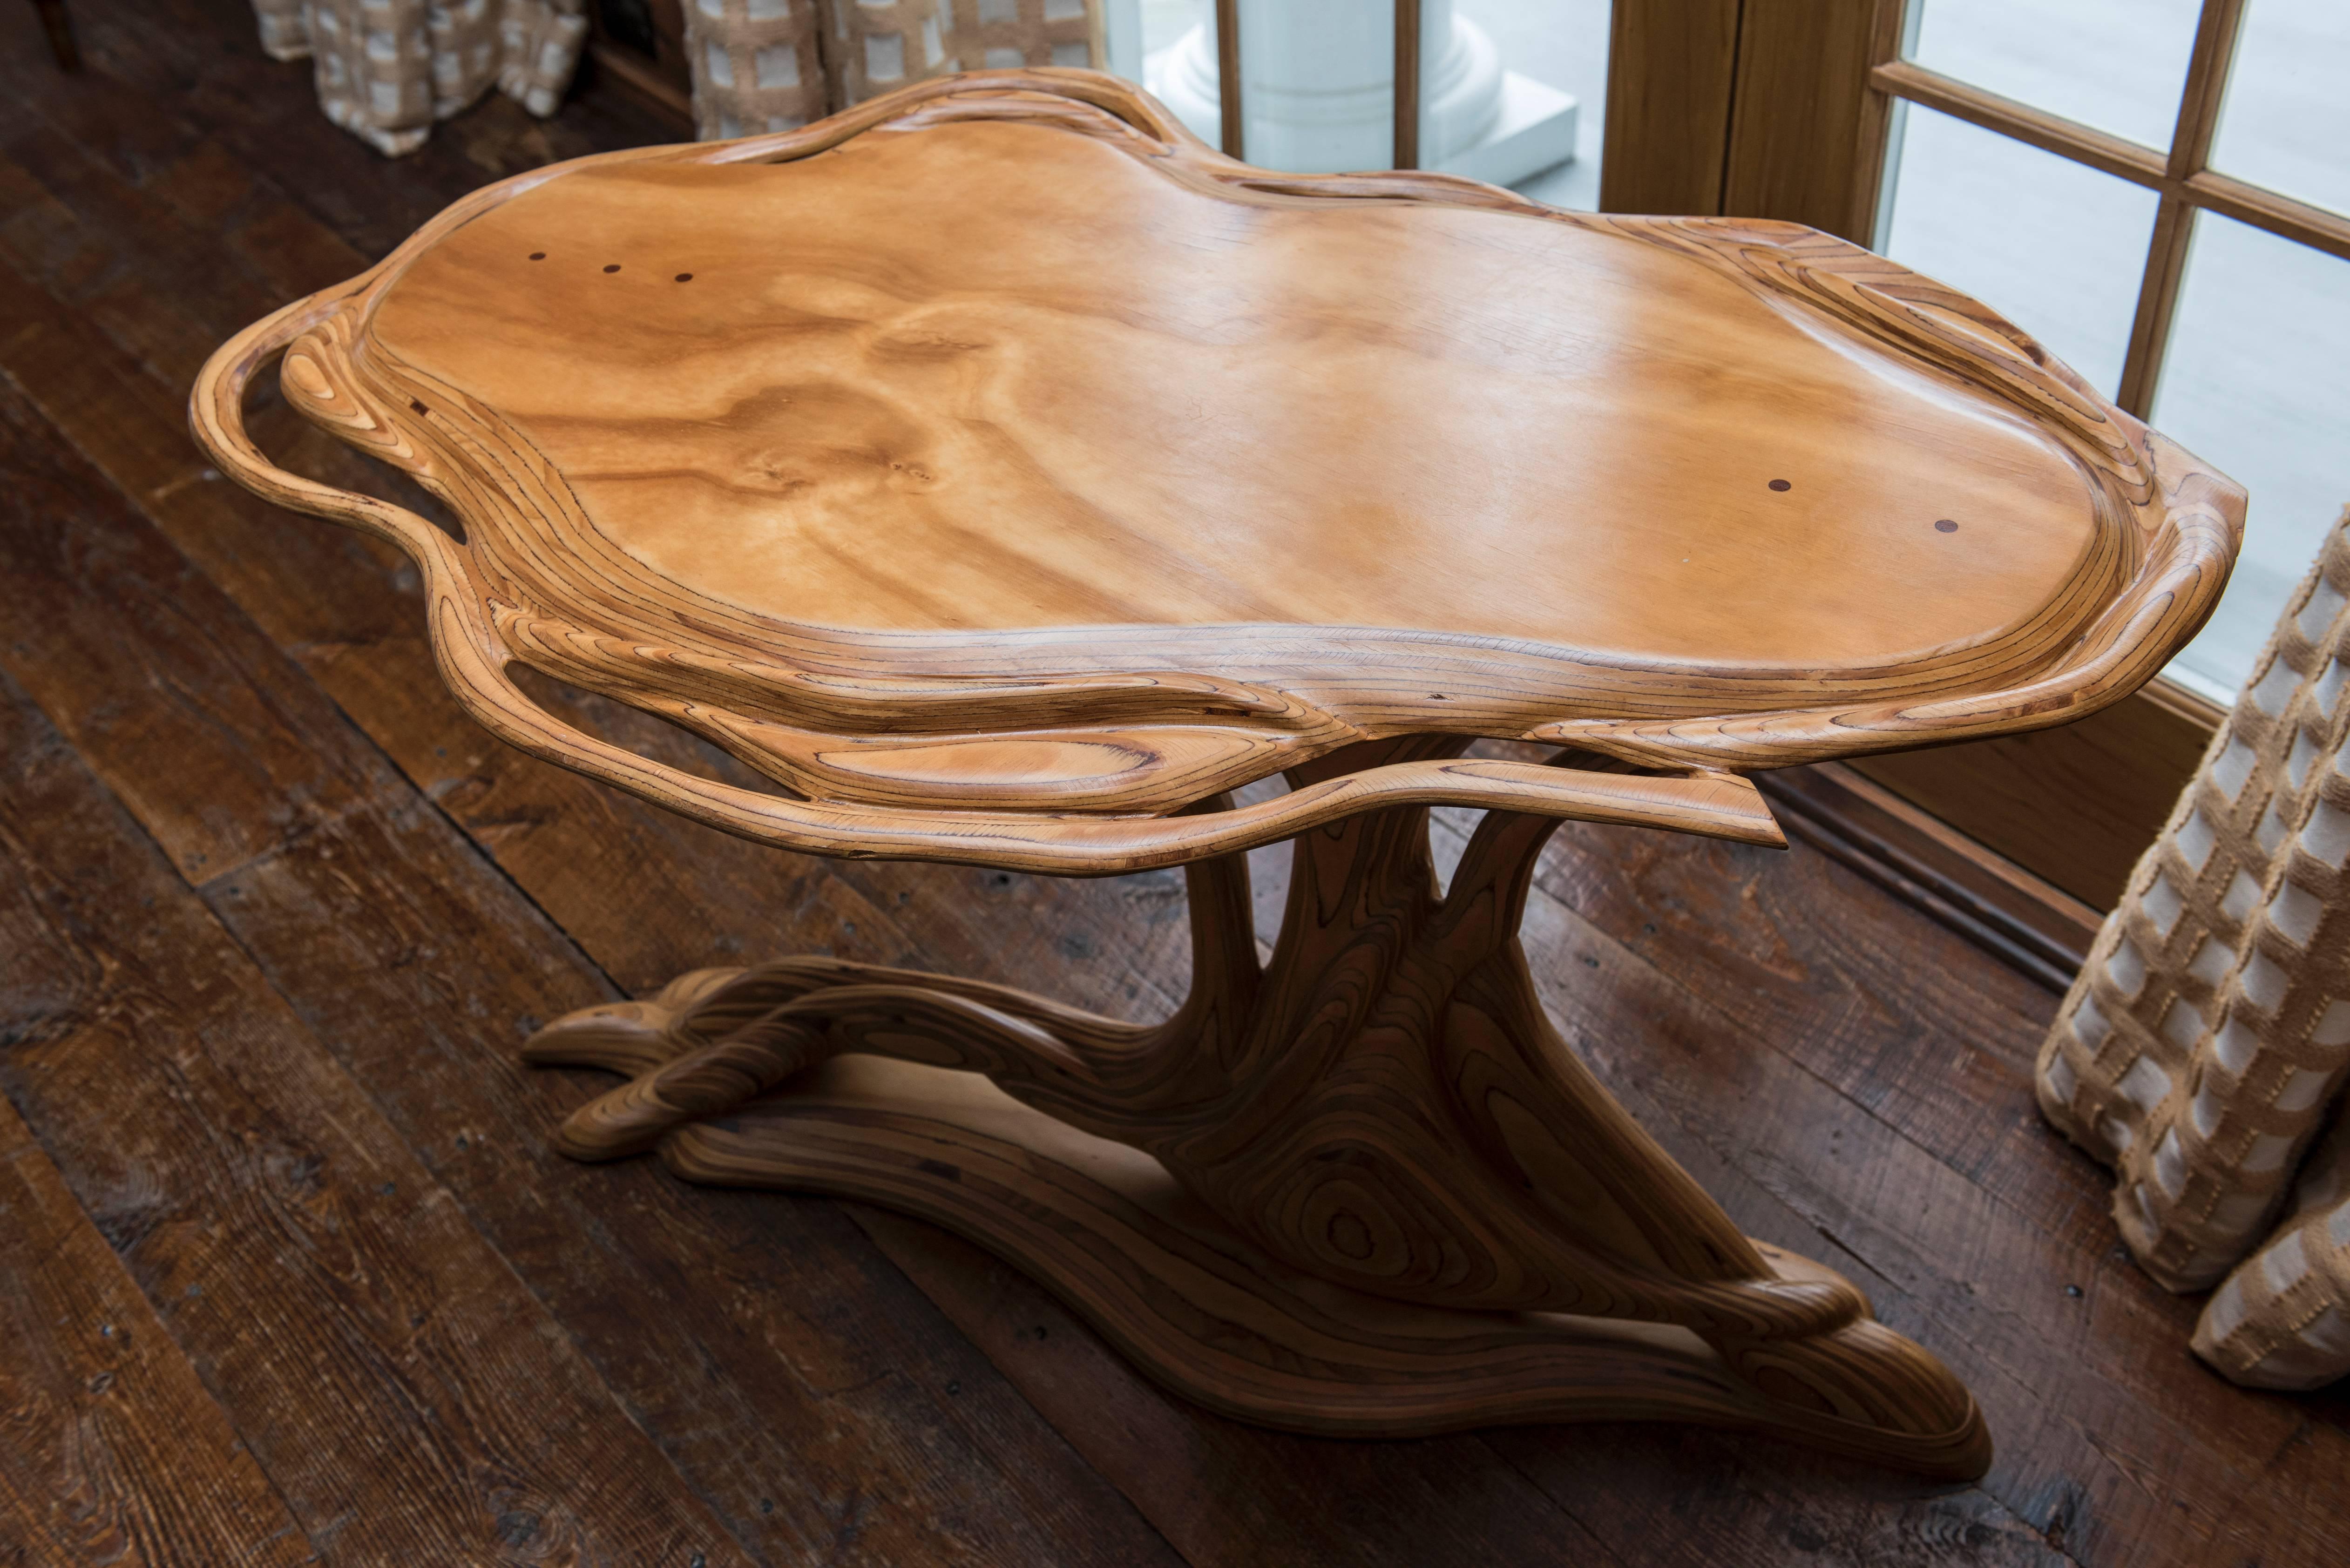 Root table, sculptural, artistic style.